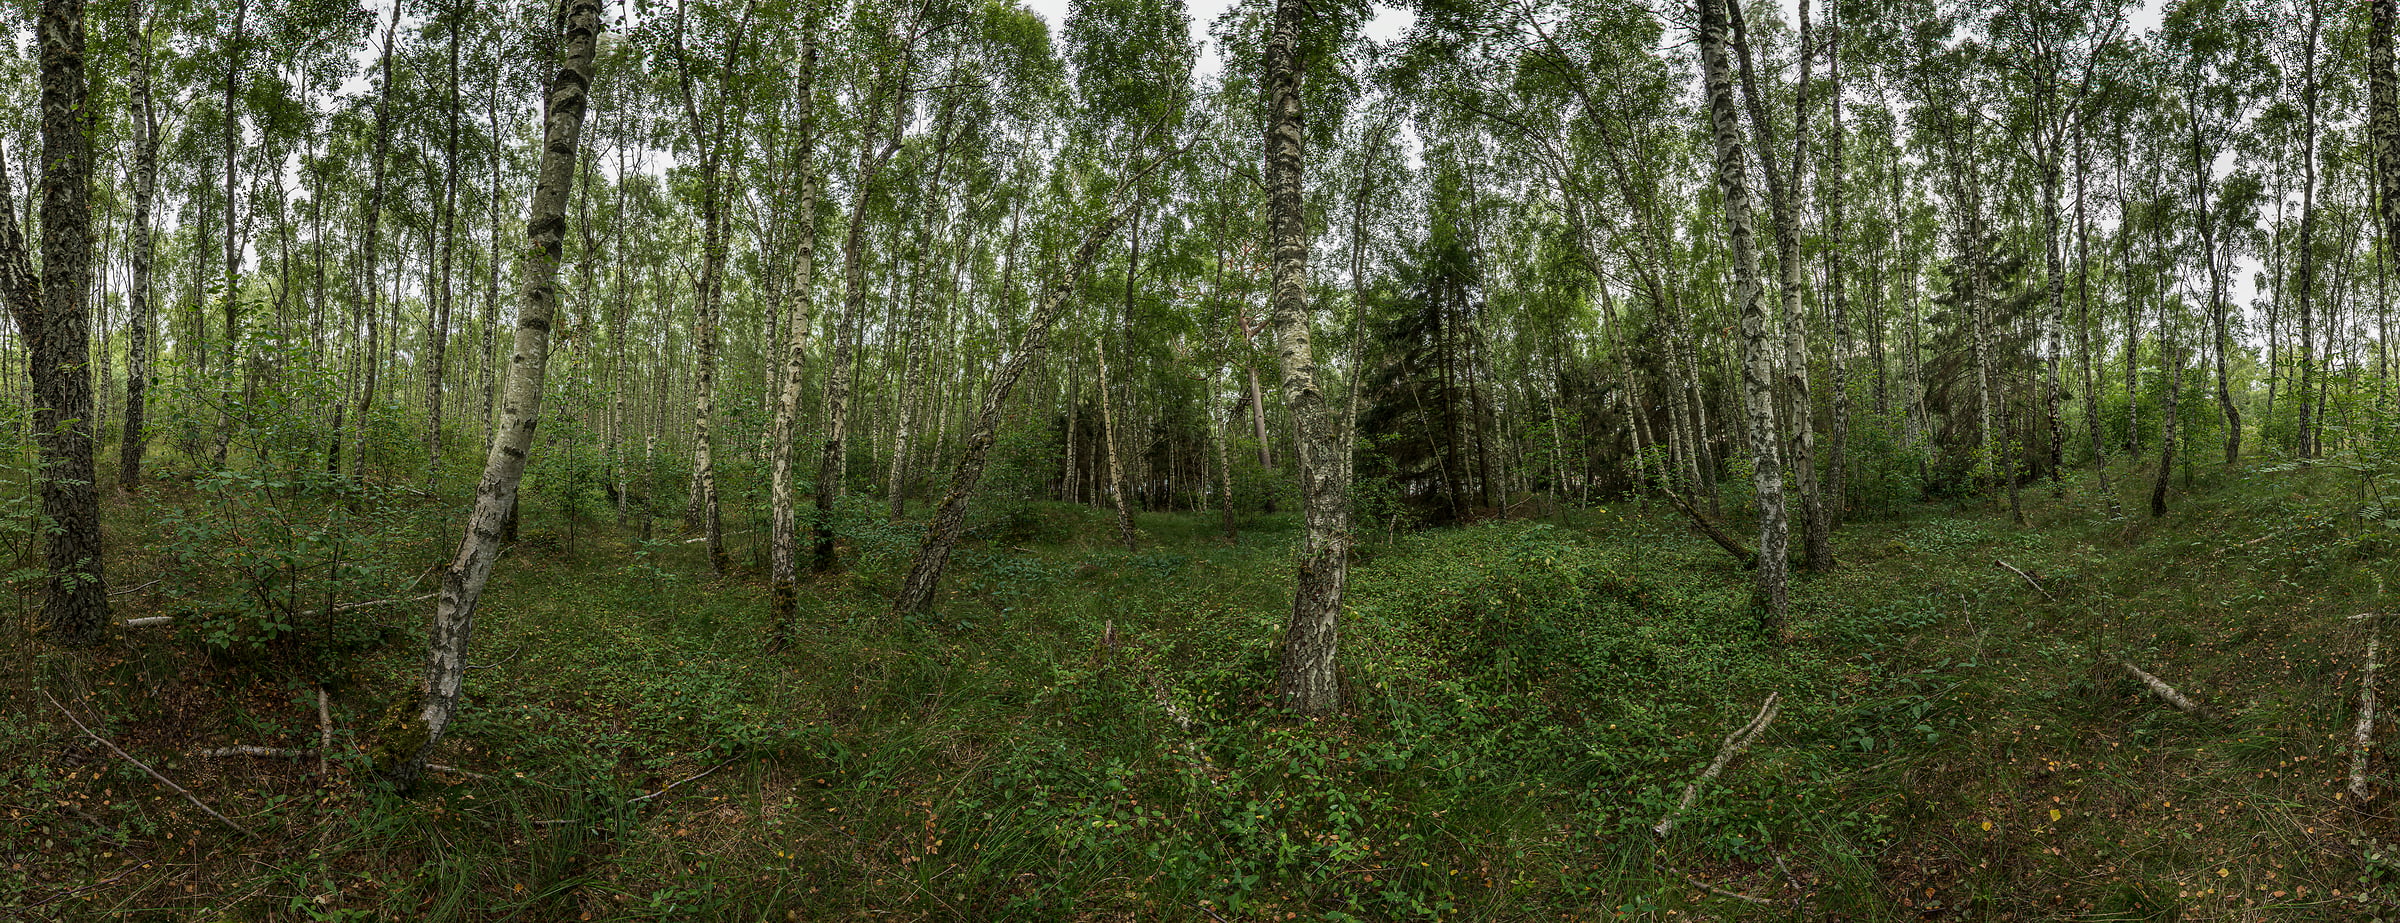 160 megapixels! A very high resolution, large-format VAST photo print of forest in Sweden; nature photograph created by Alfred Feil in Luederup, Schonen, Sweden.